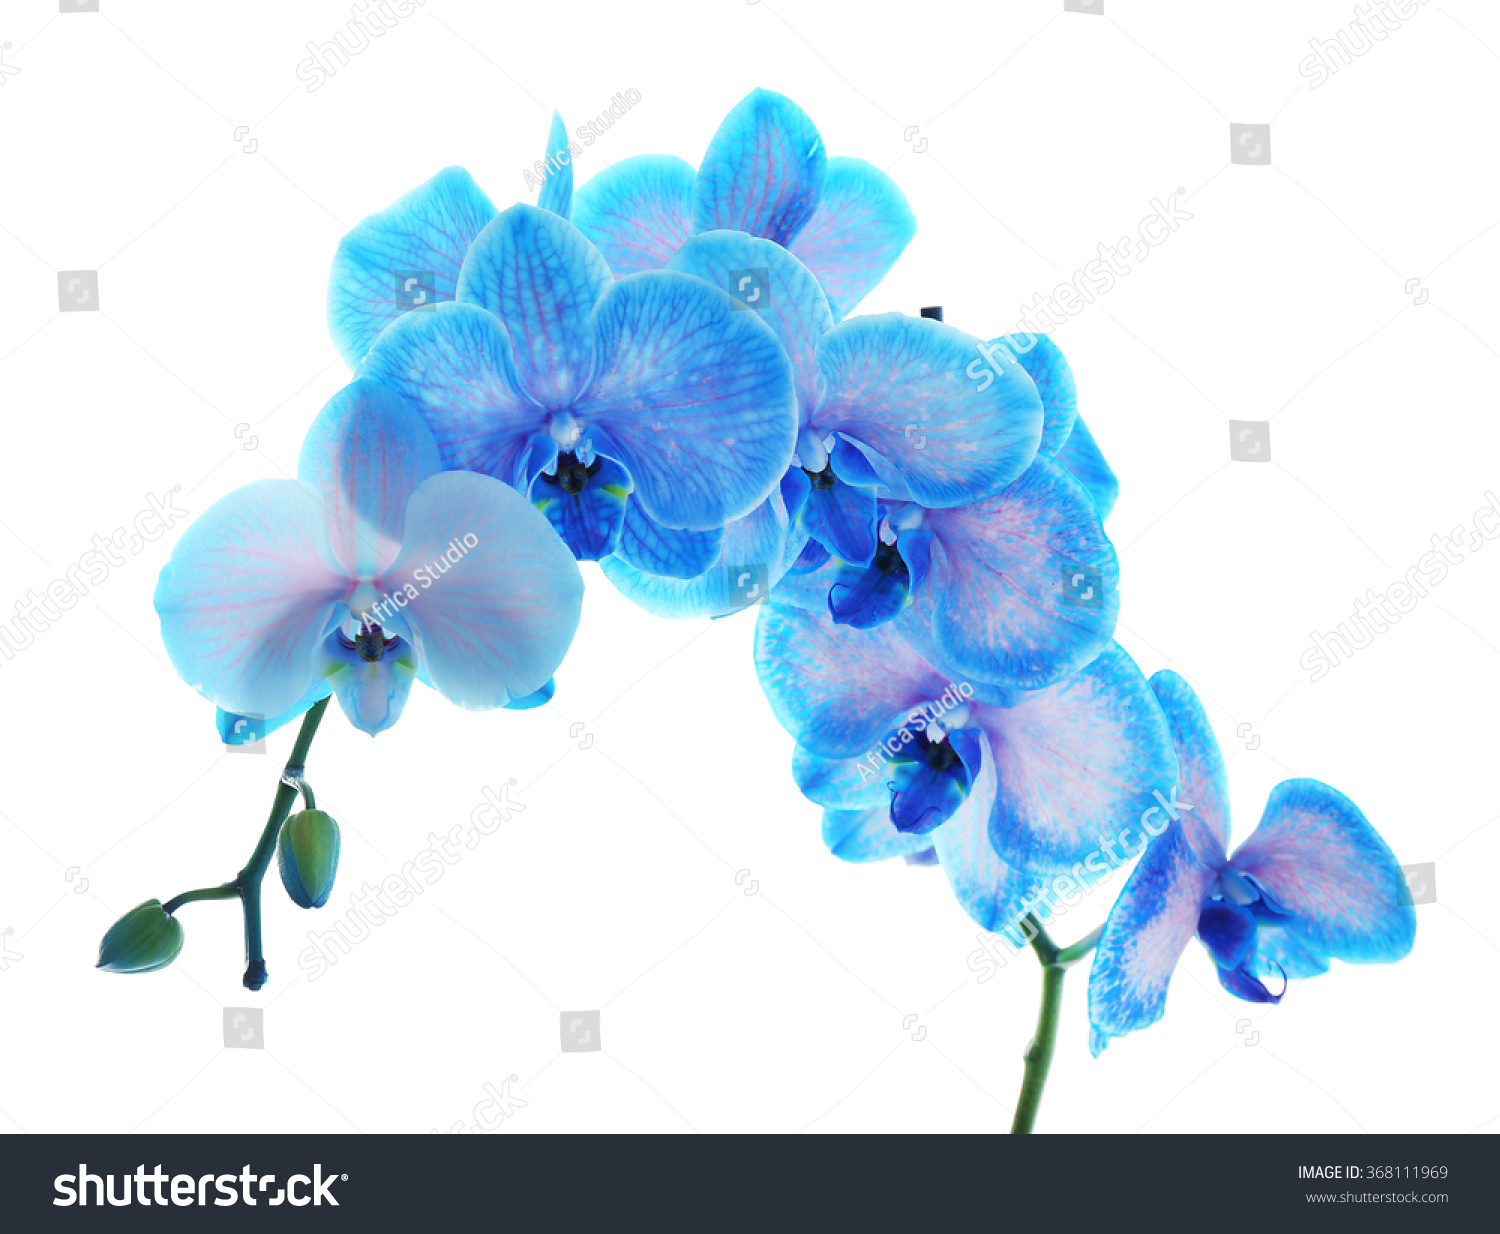 Beautiful Blue Orchid Flower Isolated On Nature Stock Image 368111969,Kitchen Cabinet Colors With Dark Wood Floors